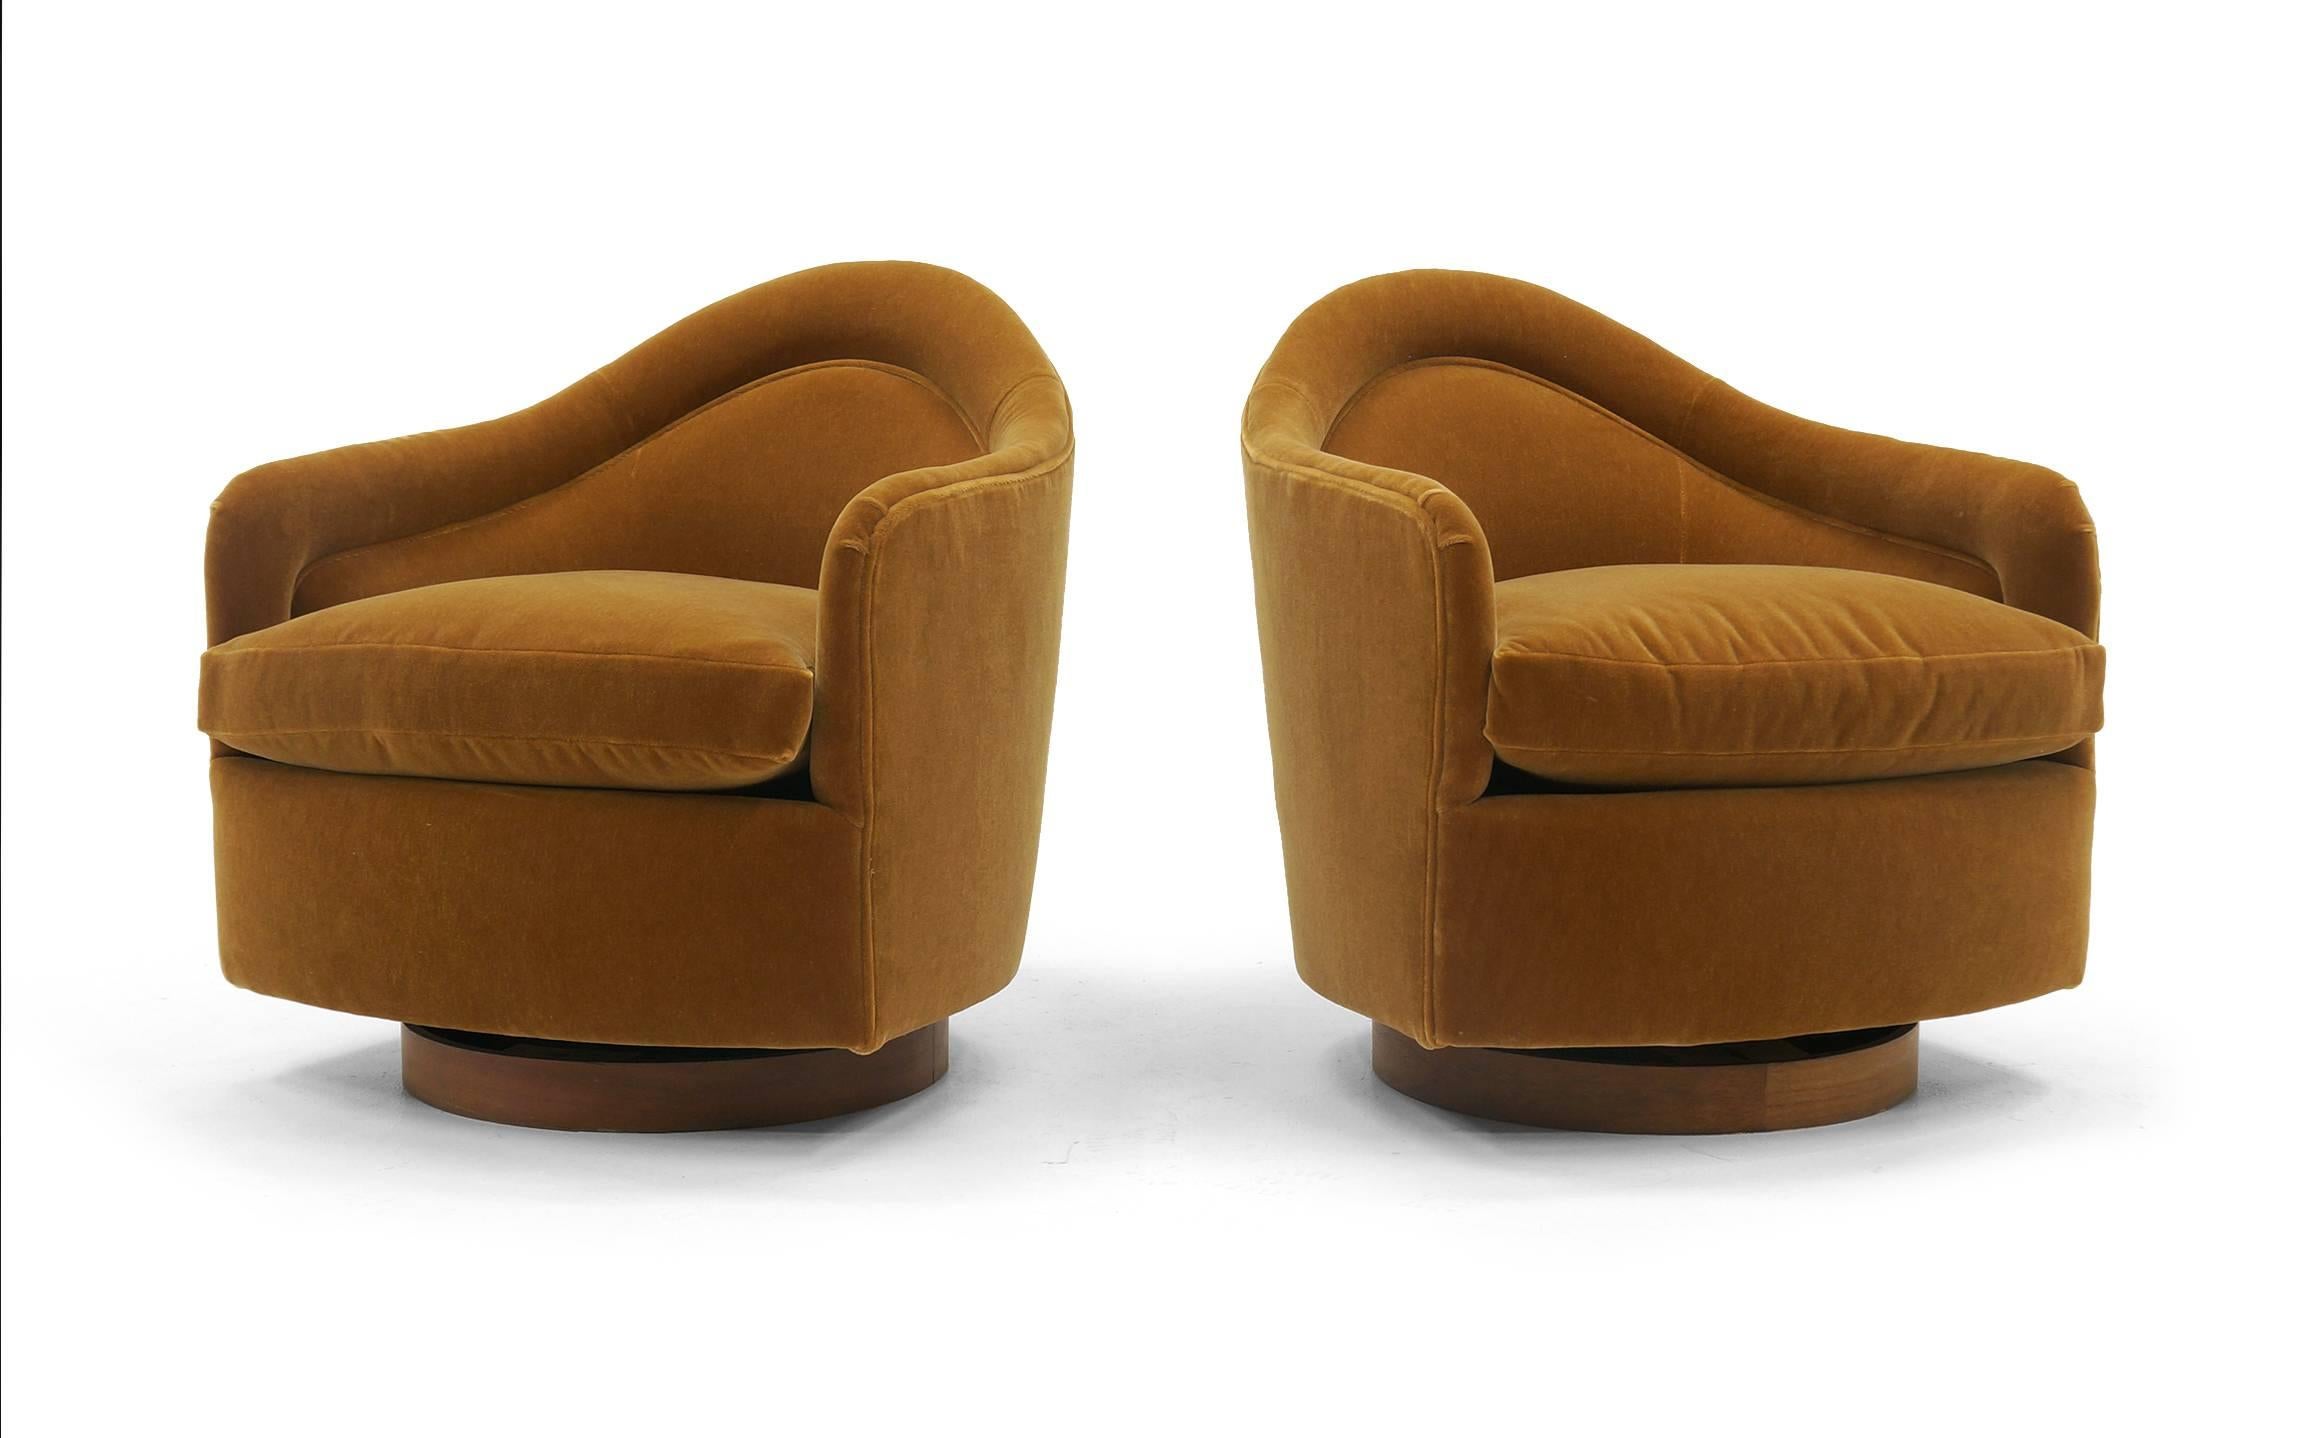 Pair of Milo Baughman tilt / swivel club / lounge chairs expertly restored and reupholstered in a beautiful $200 per yard camel / cognac color mohair fabric. Walnut base.